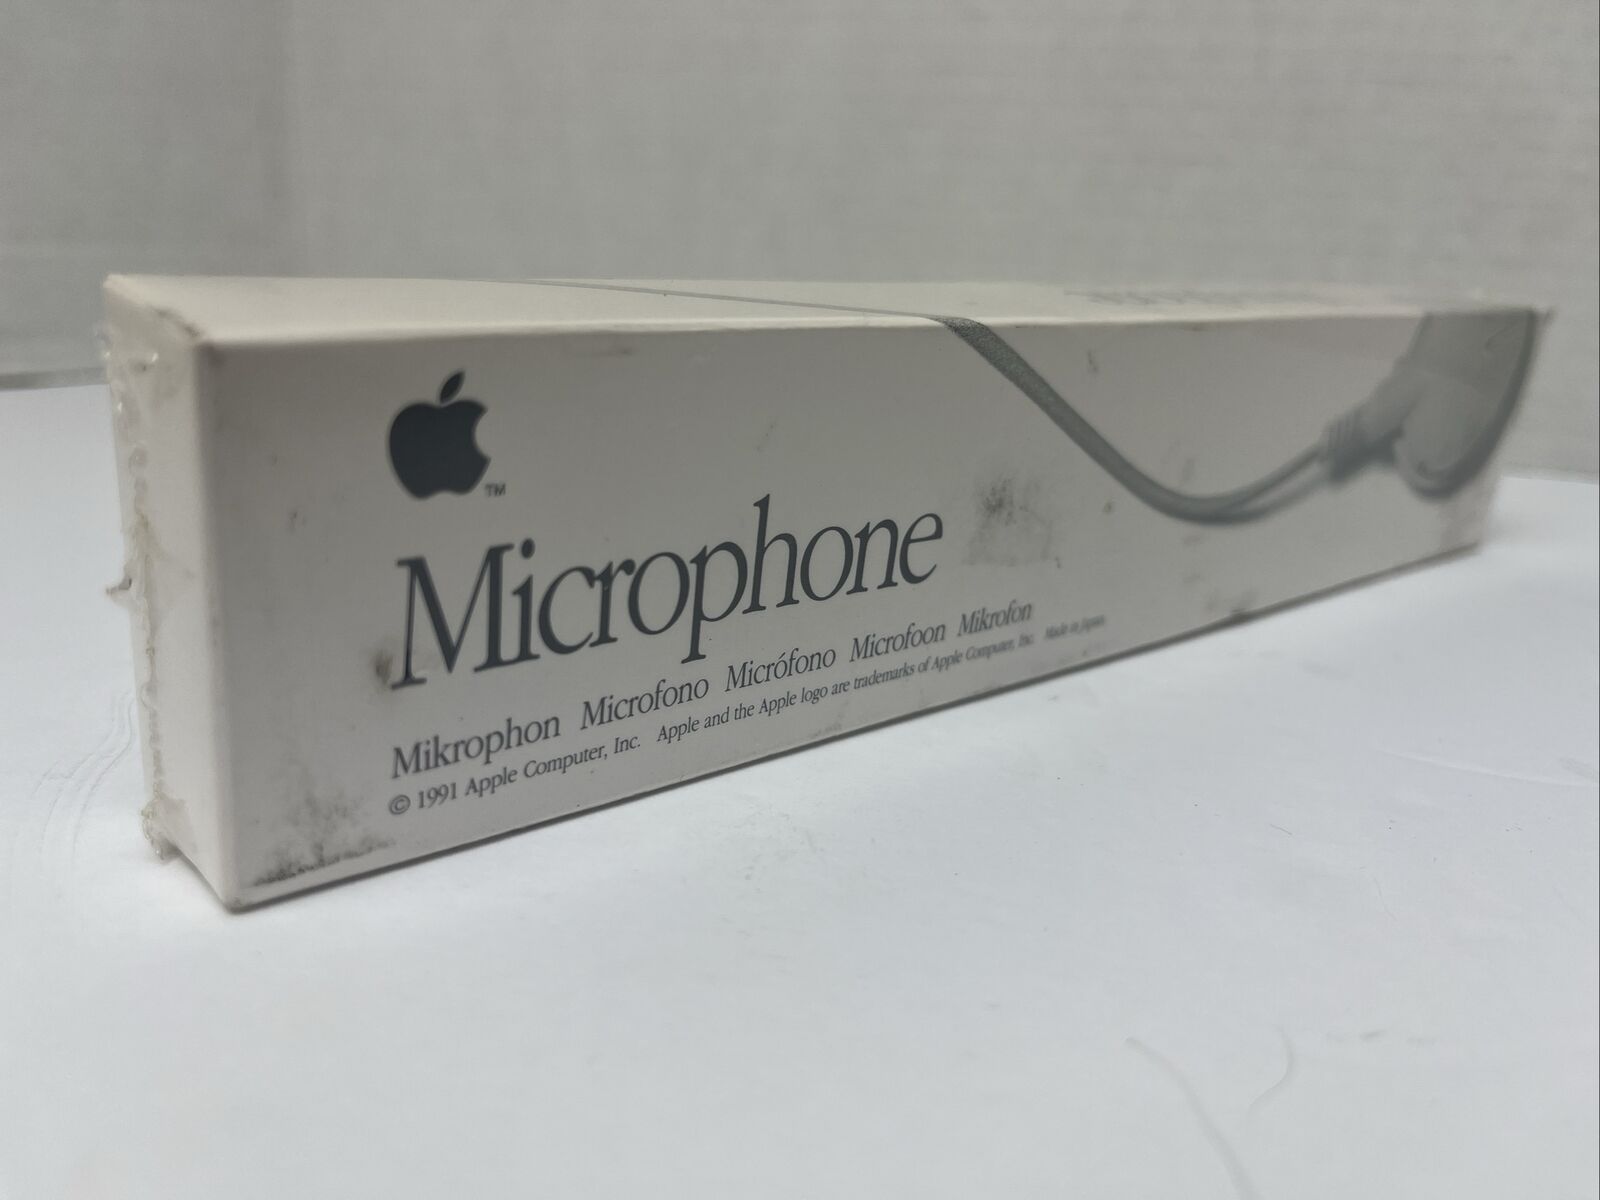 Vintage 1991 Apple computer microphone sealed never open brand new